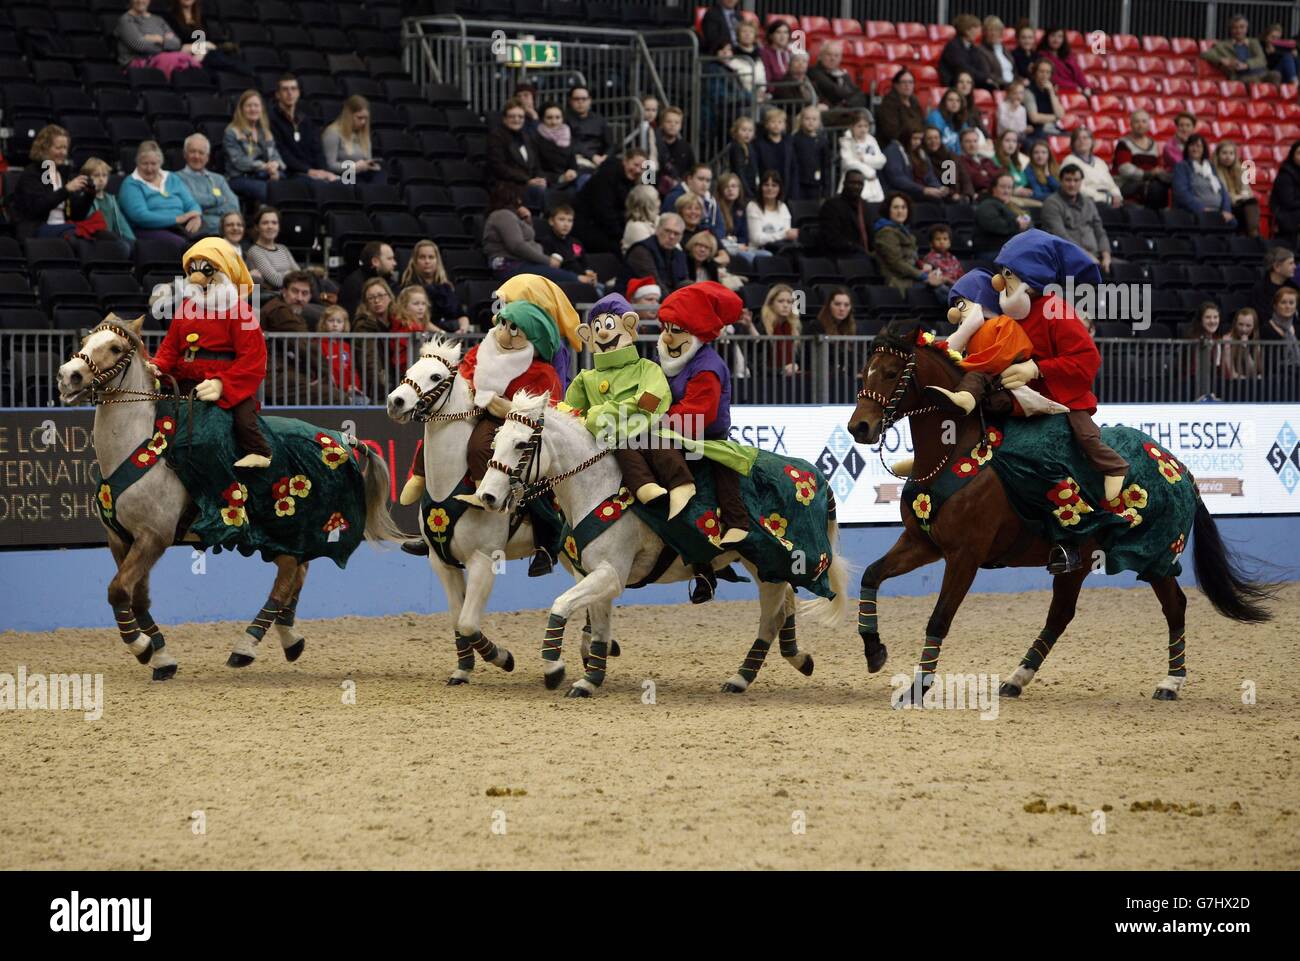 Members of the Saffron Walden &amp; District Riding Club dress as the seven dwarves as they compete in the SEIB/British Riding Clubs Quadrille of the Year during day six of the Olympia London International Horse Show at the Olympia Exhibition Centre, London. Stock Photo